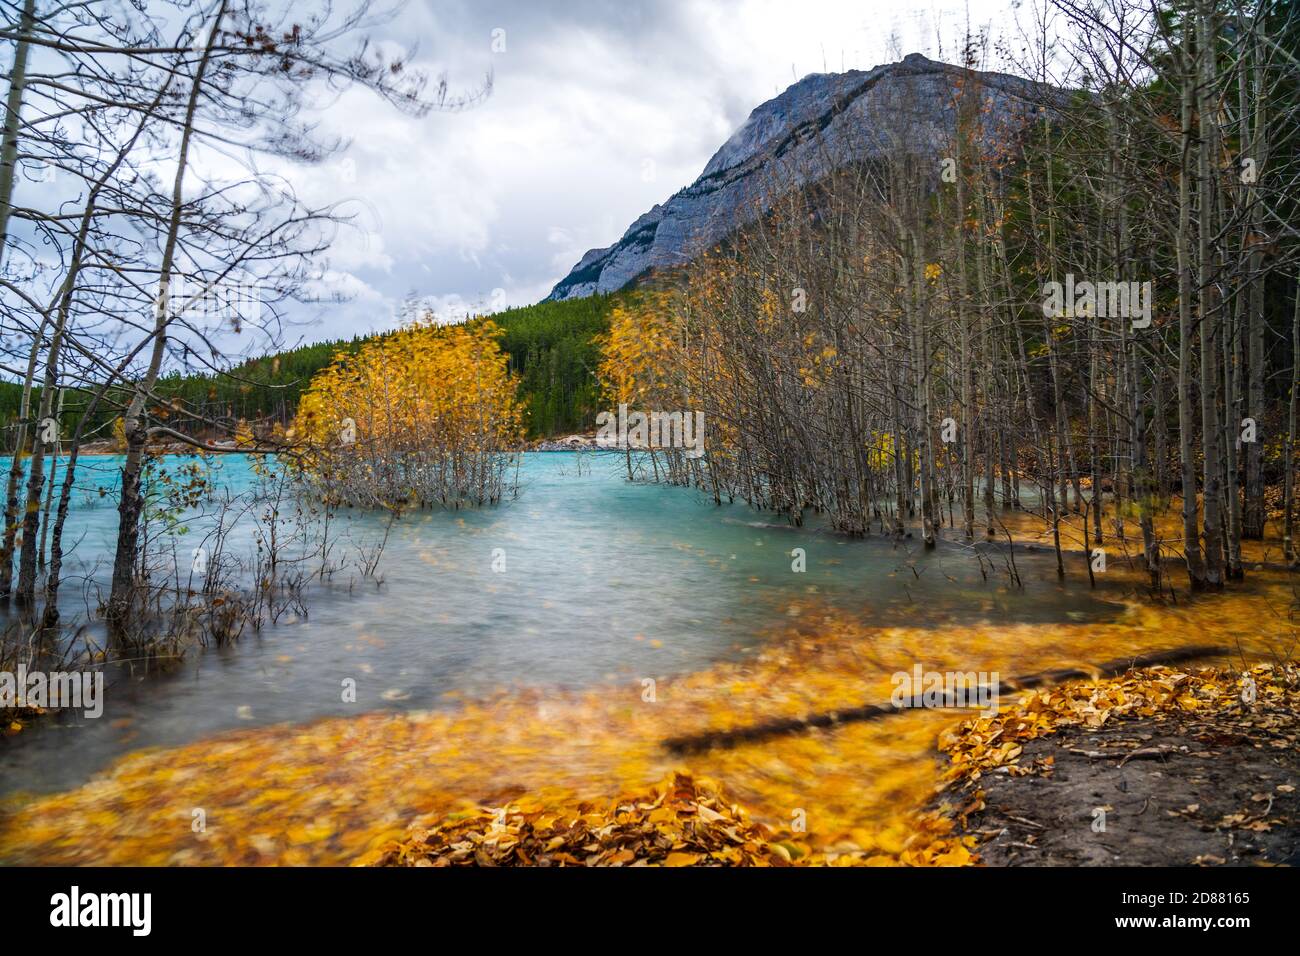 Dried Birch Branches and fallen golden foliage on the emerald green water surface. Scenery view at Abraham lake shore in autumn season. Jasper Stock Photo